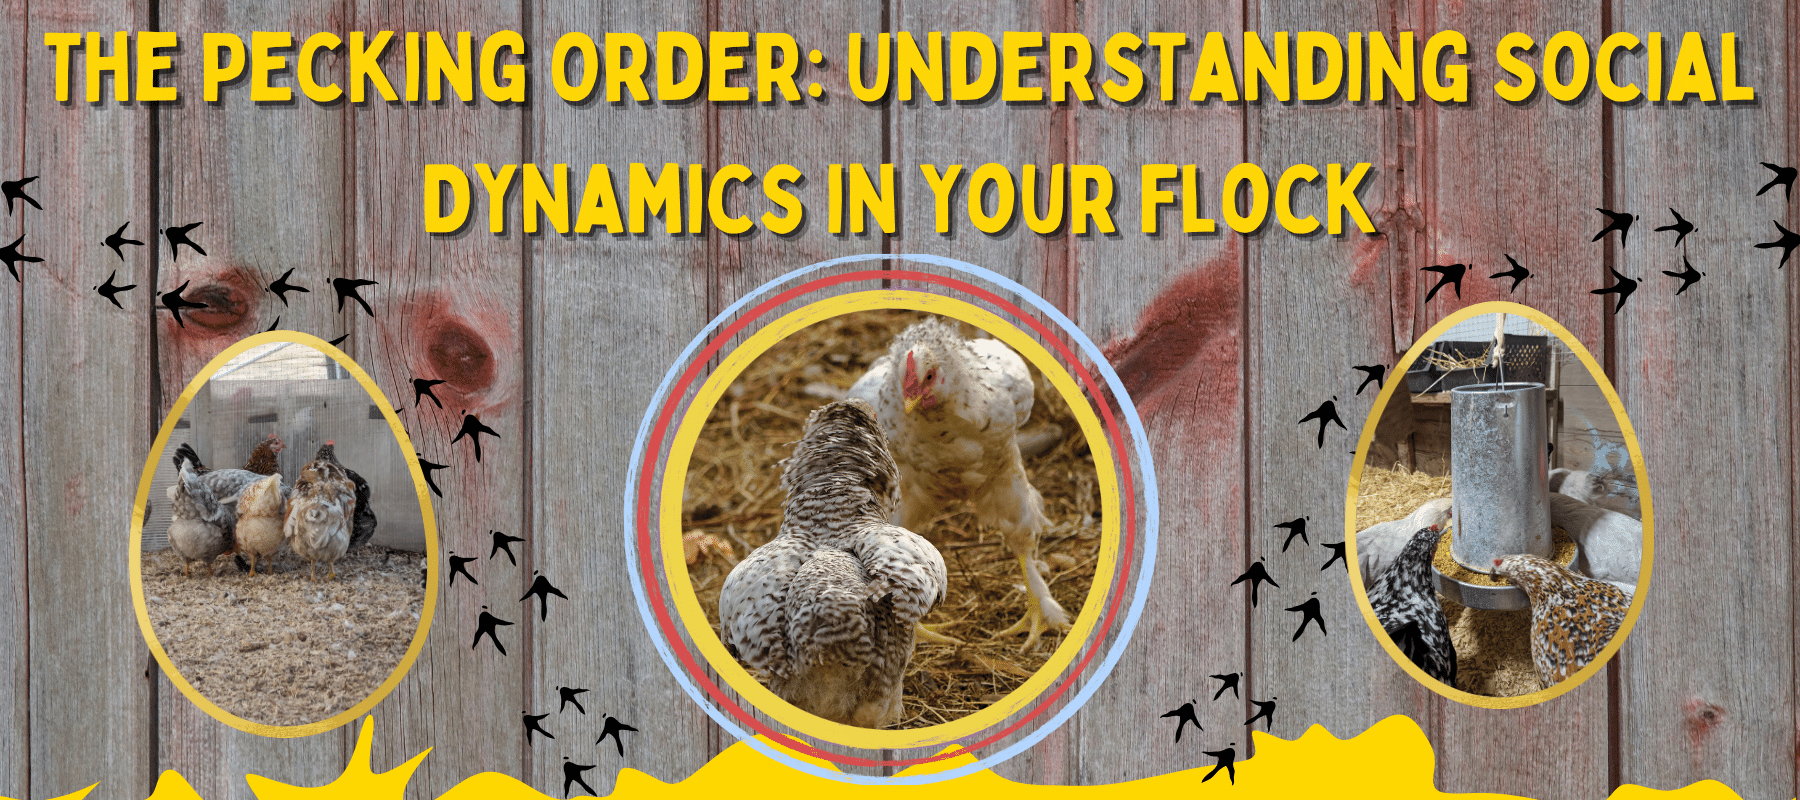 The Pecking Order: Understanding Social Dynamics in Your Flock